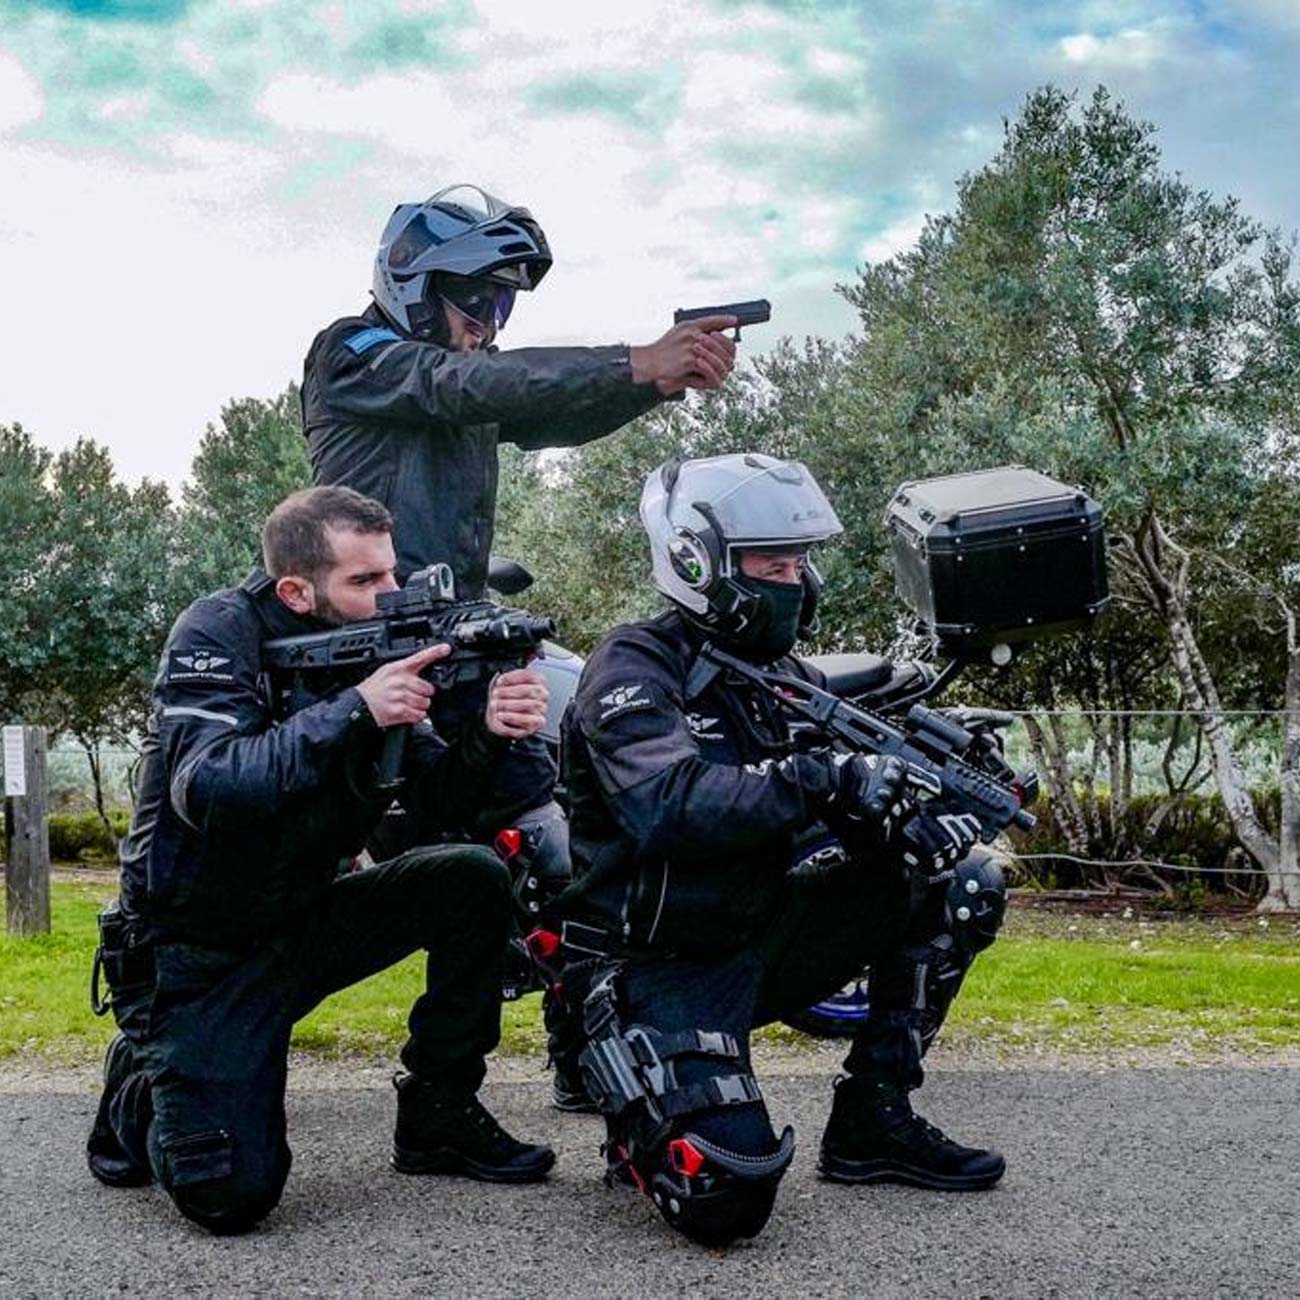 Electra security team together in tactical gear pointing weapons